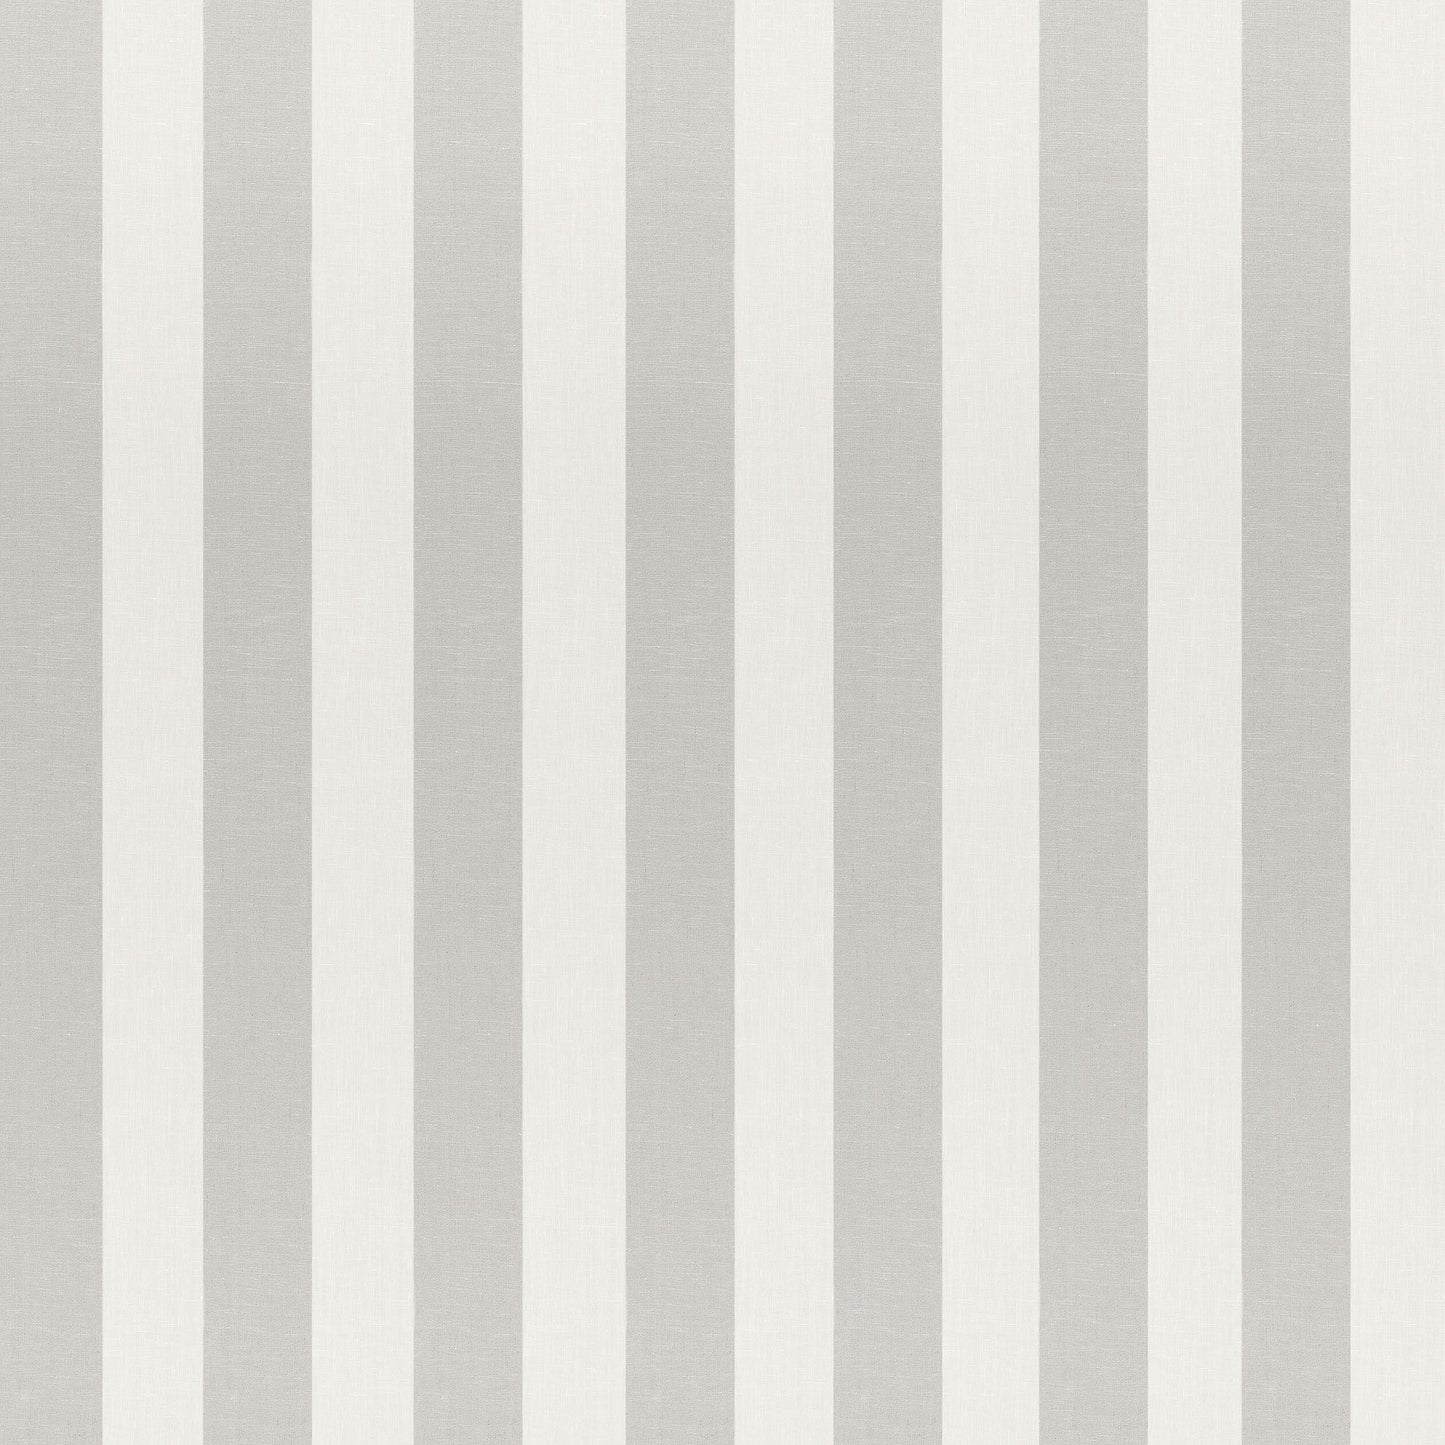 Purchase  Ann French Fabric Product# AW9114  pattern name  Kings Road Stripe